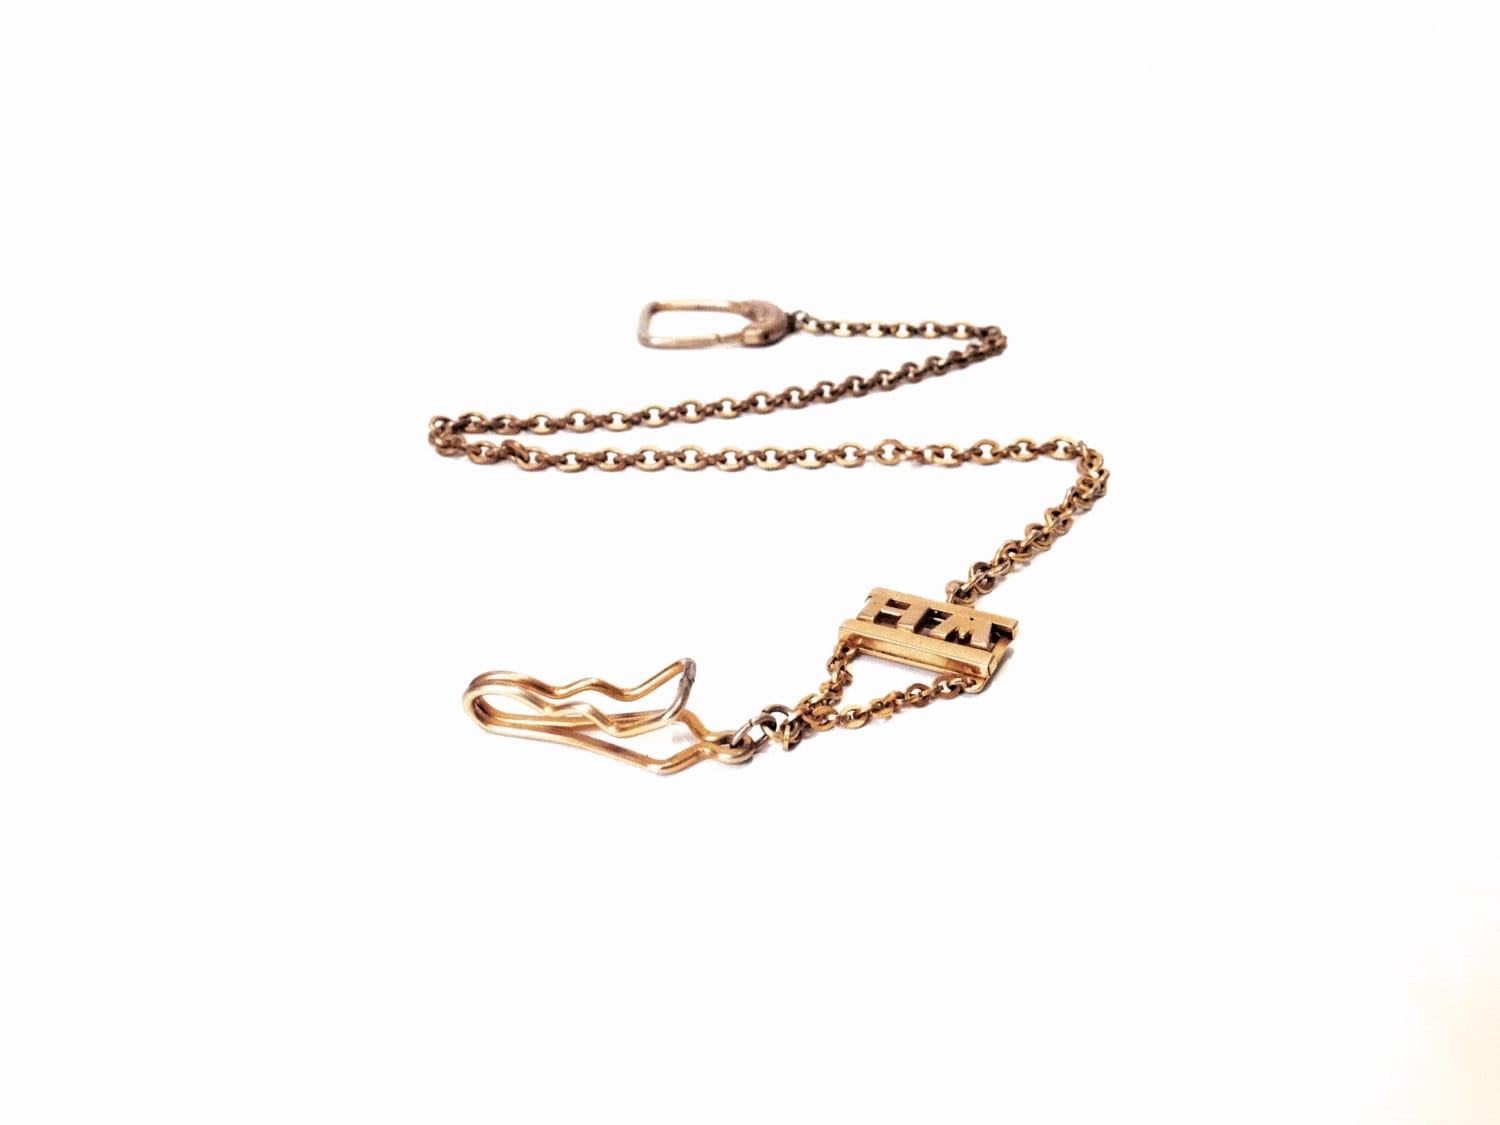 Vintage Swank Gold Filled or Plated Pocket Watch Chain (B13732)